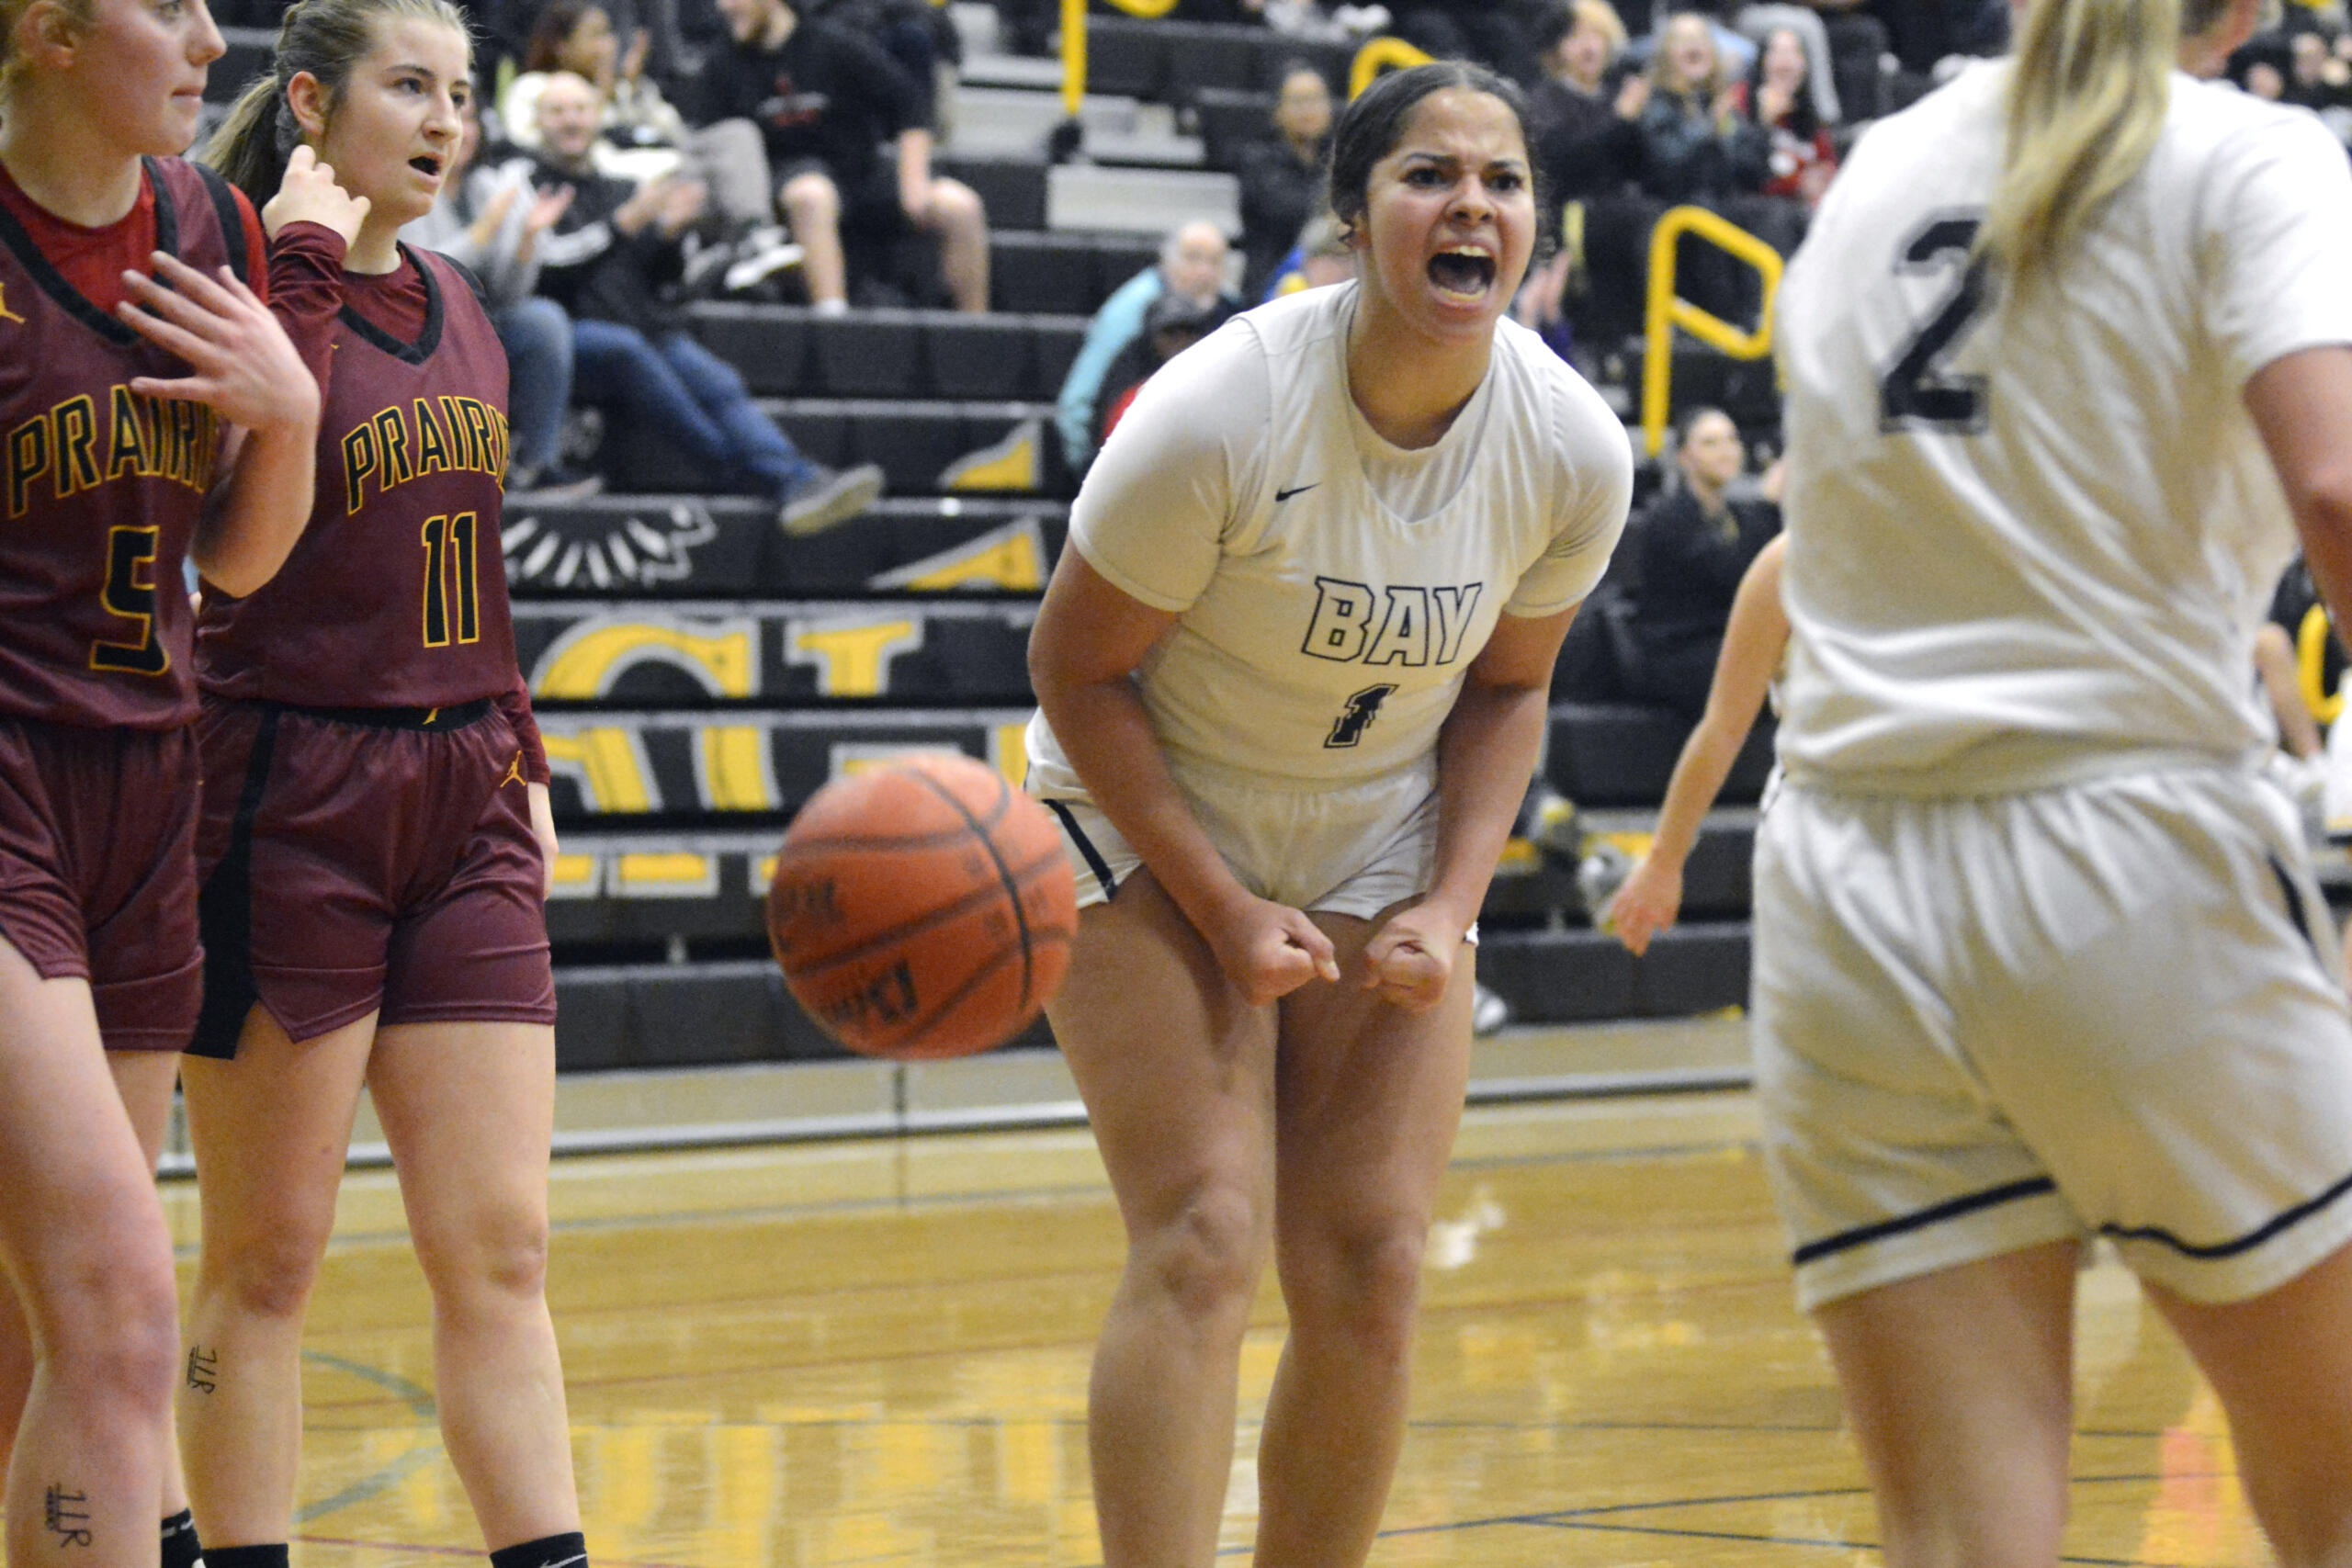 Hudson’s Bay junior Alana Stephens, center, celebrates after teammate Promise Bond, right, made a basket and drew a foul in a non-league game against Prairie on Friday, Dec. 2, 2022, at Hudson’s Bay High School.